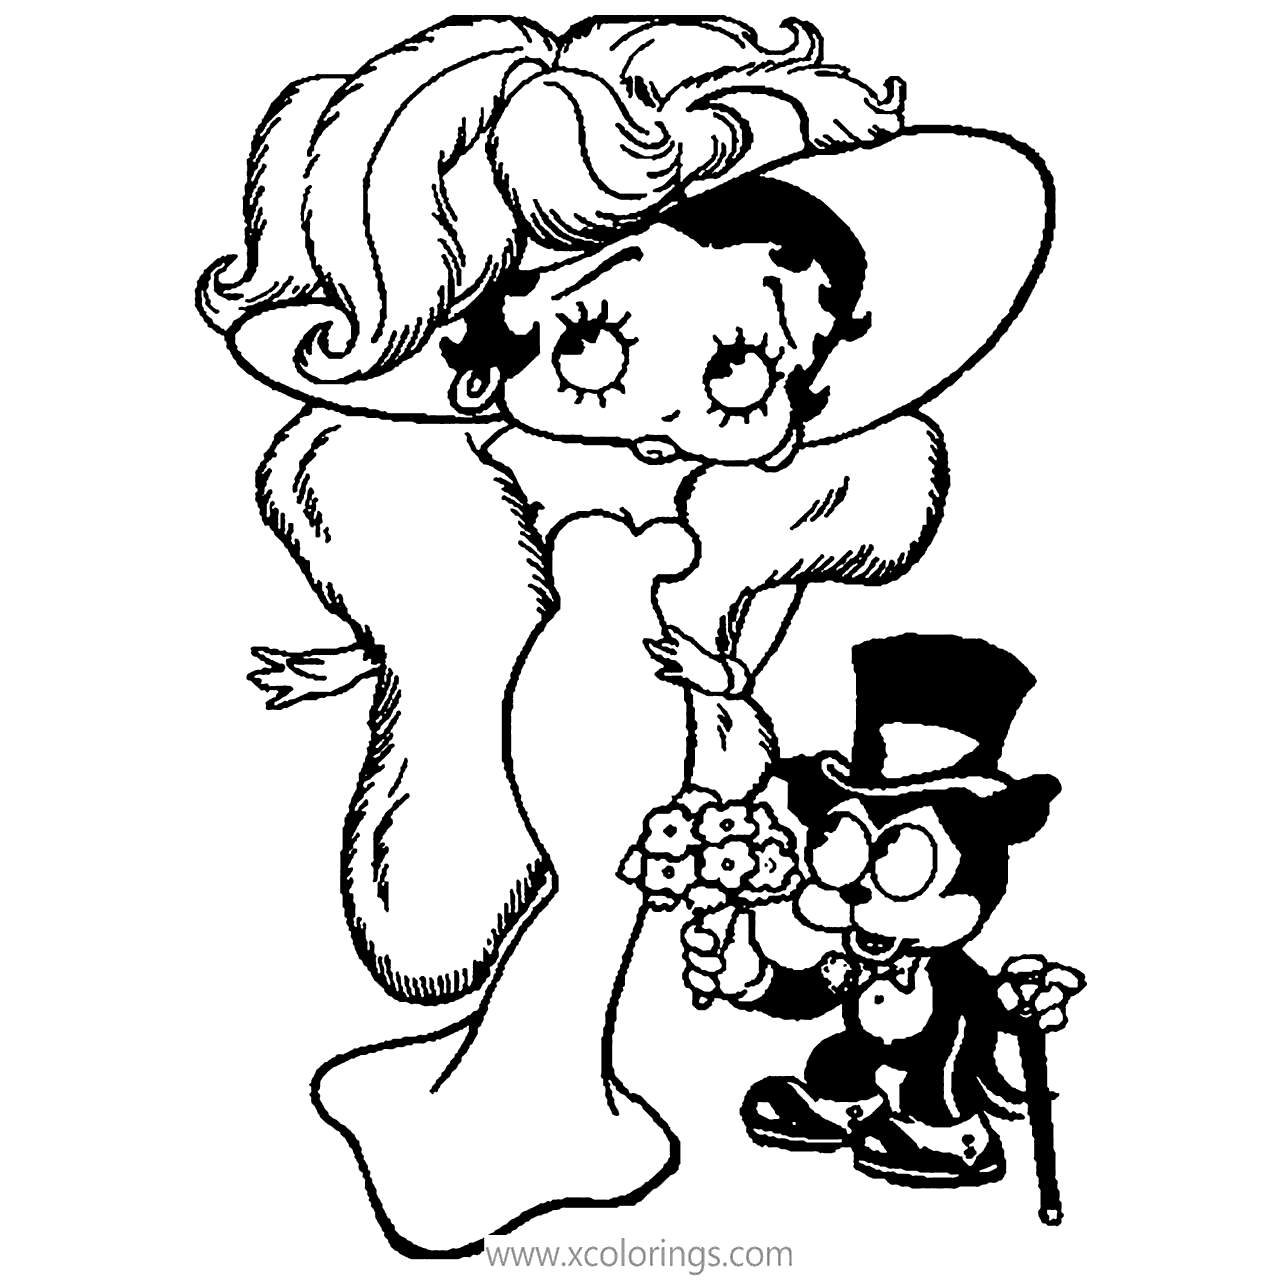 Free Betty Boop Coloring Pages Bimbo the Dog printable